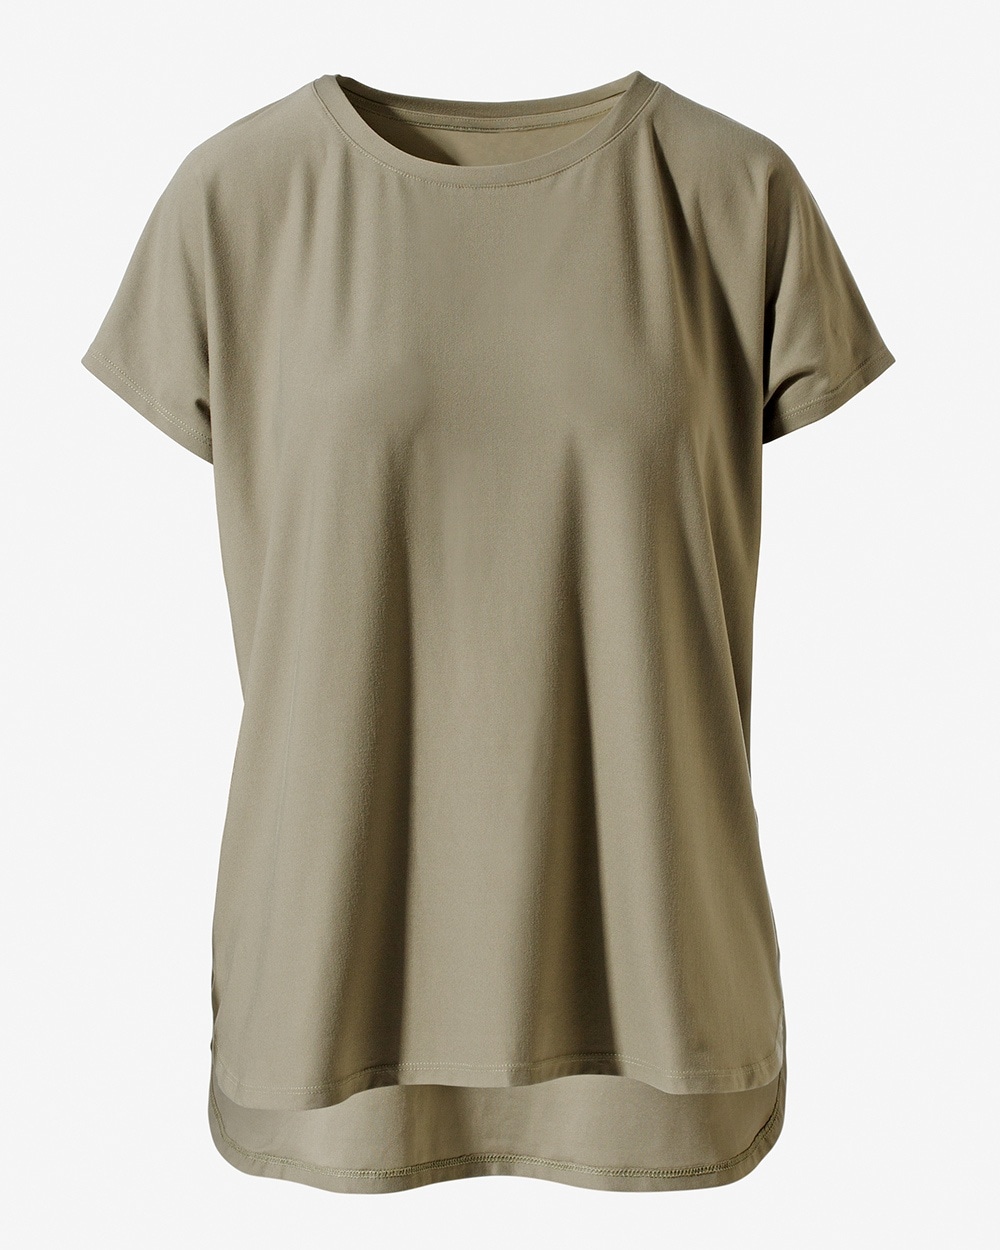 Weekends SupremelySoft Easy Pullover Tunic